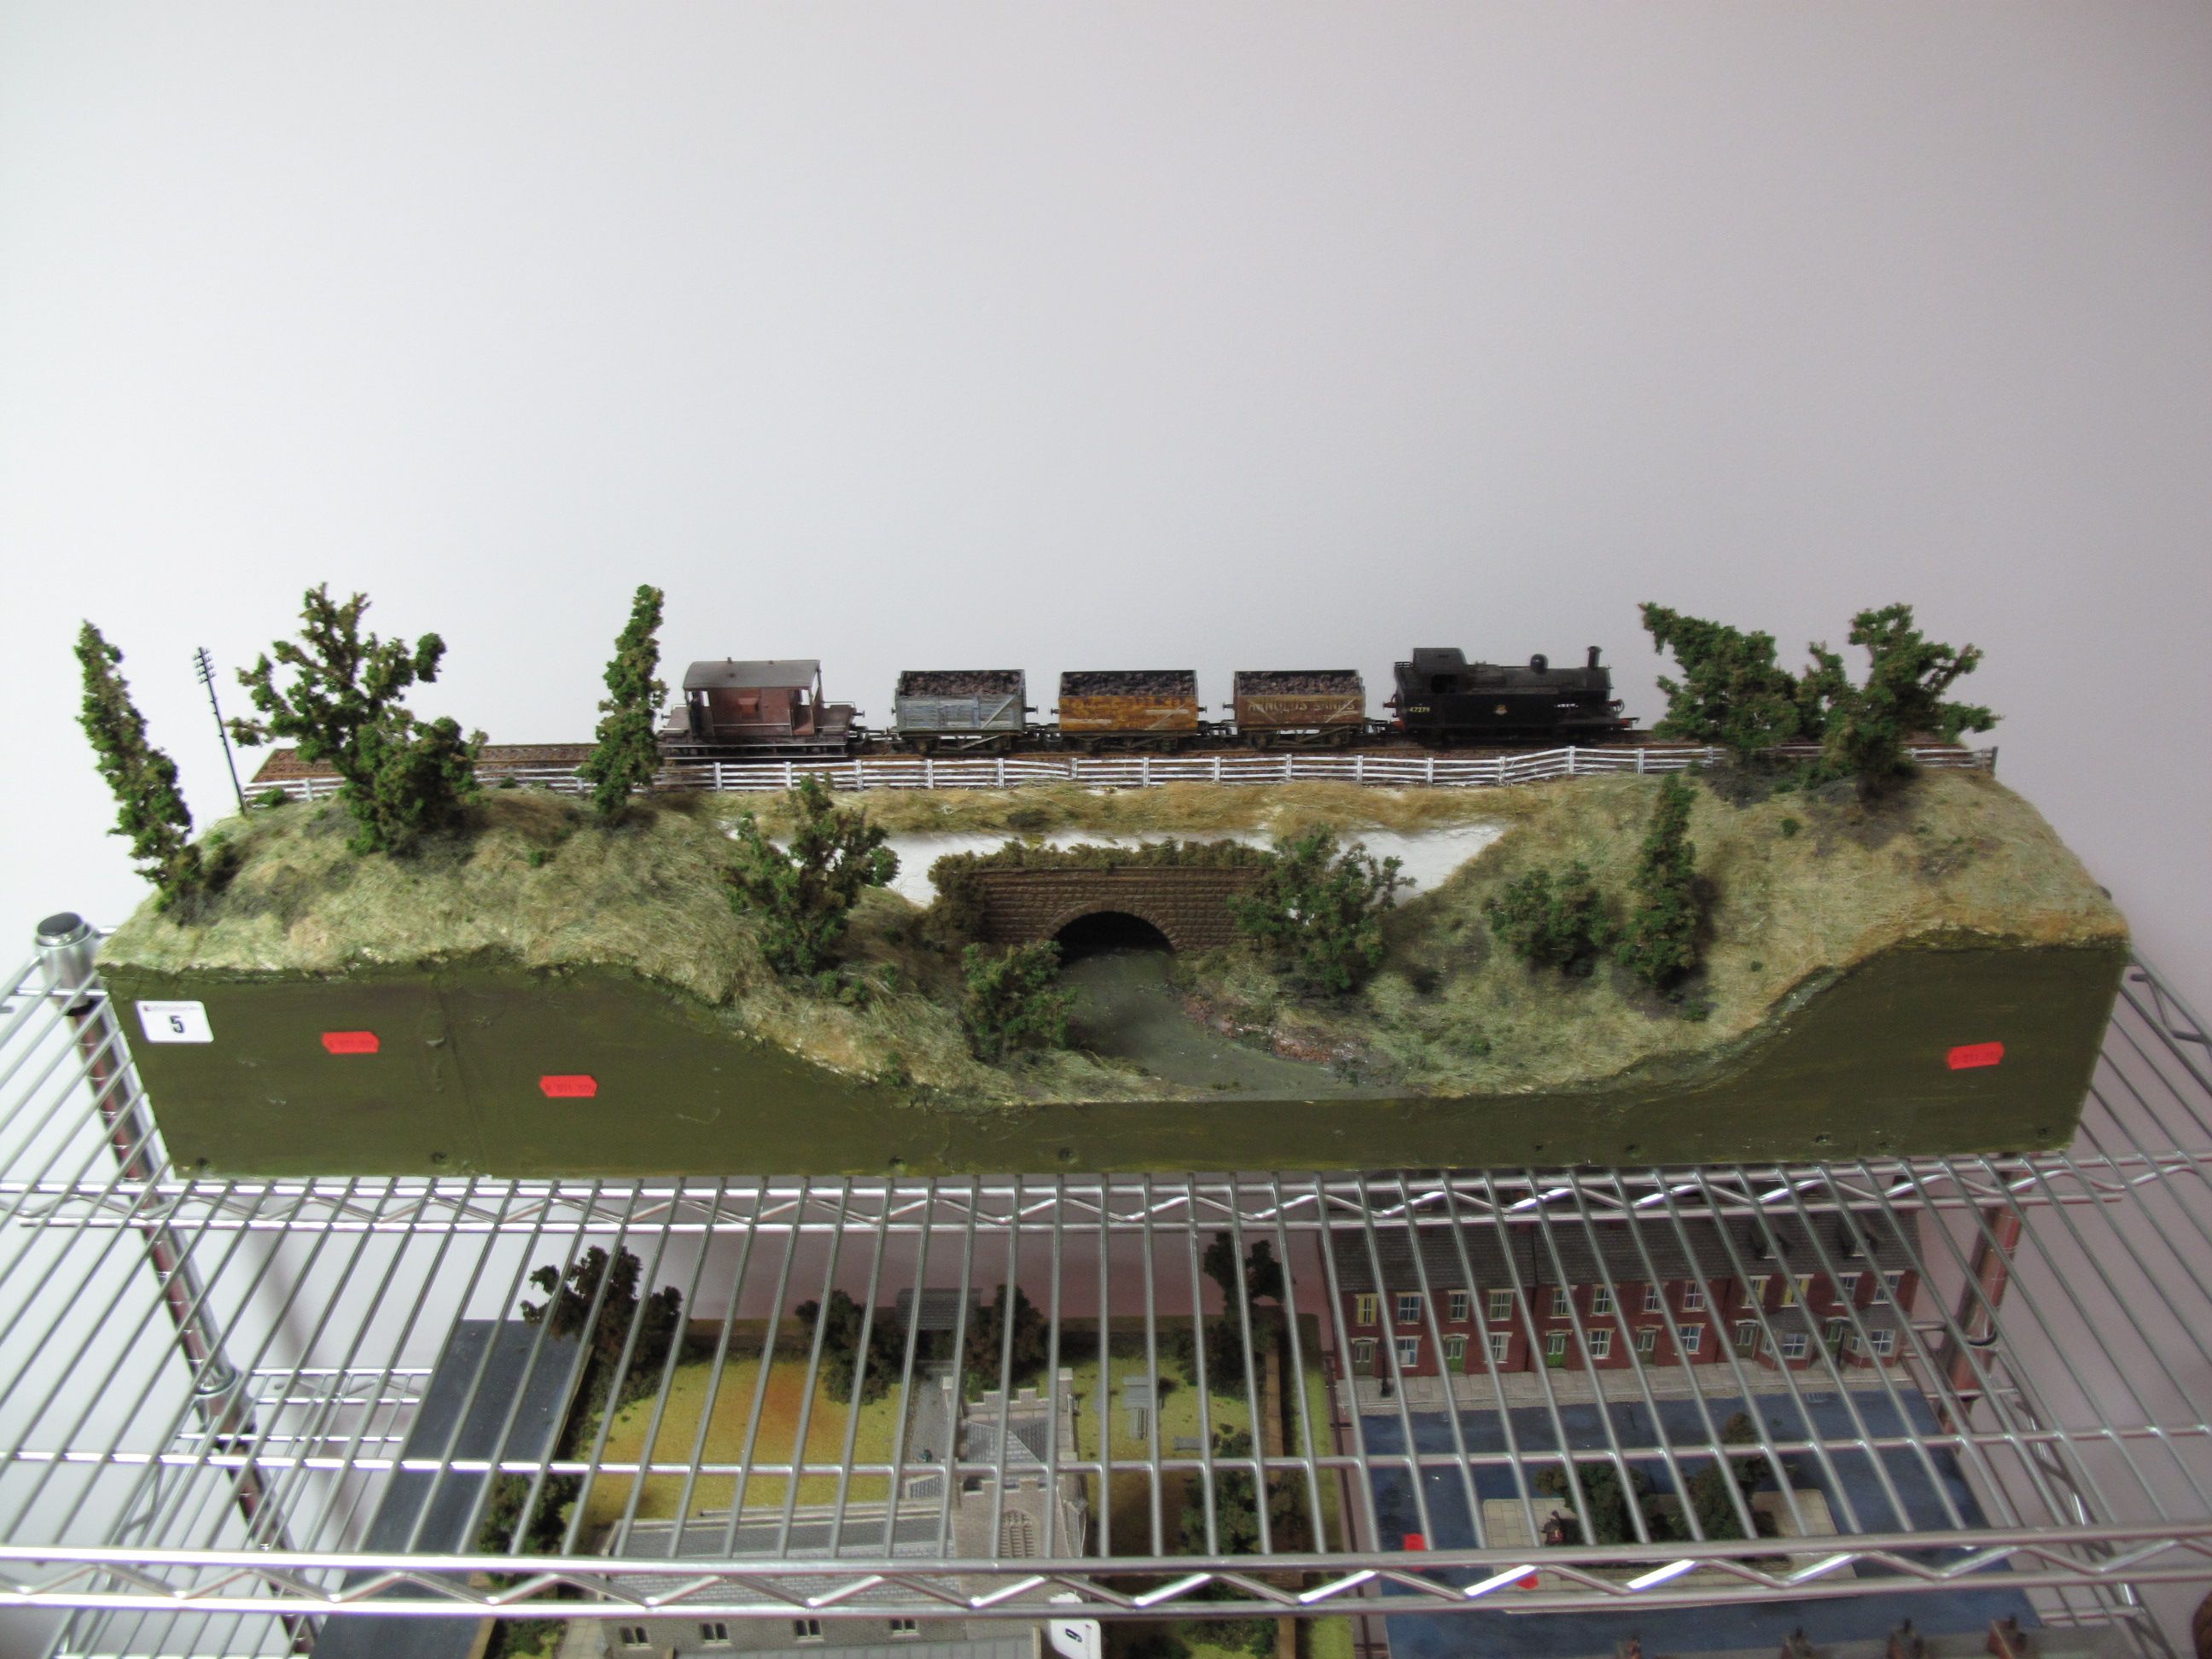 An "OO" Scale Model Railway Diorama of a Country Railway, going over a river, complete with a